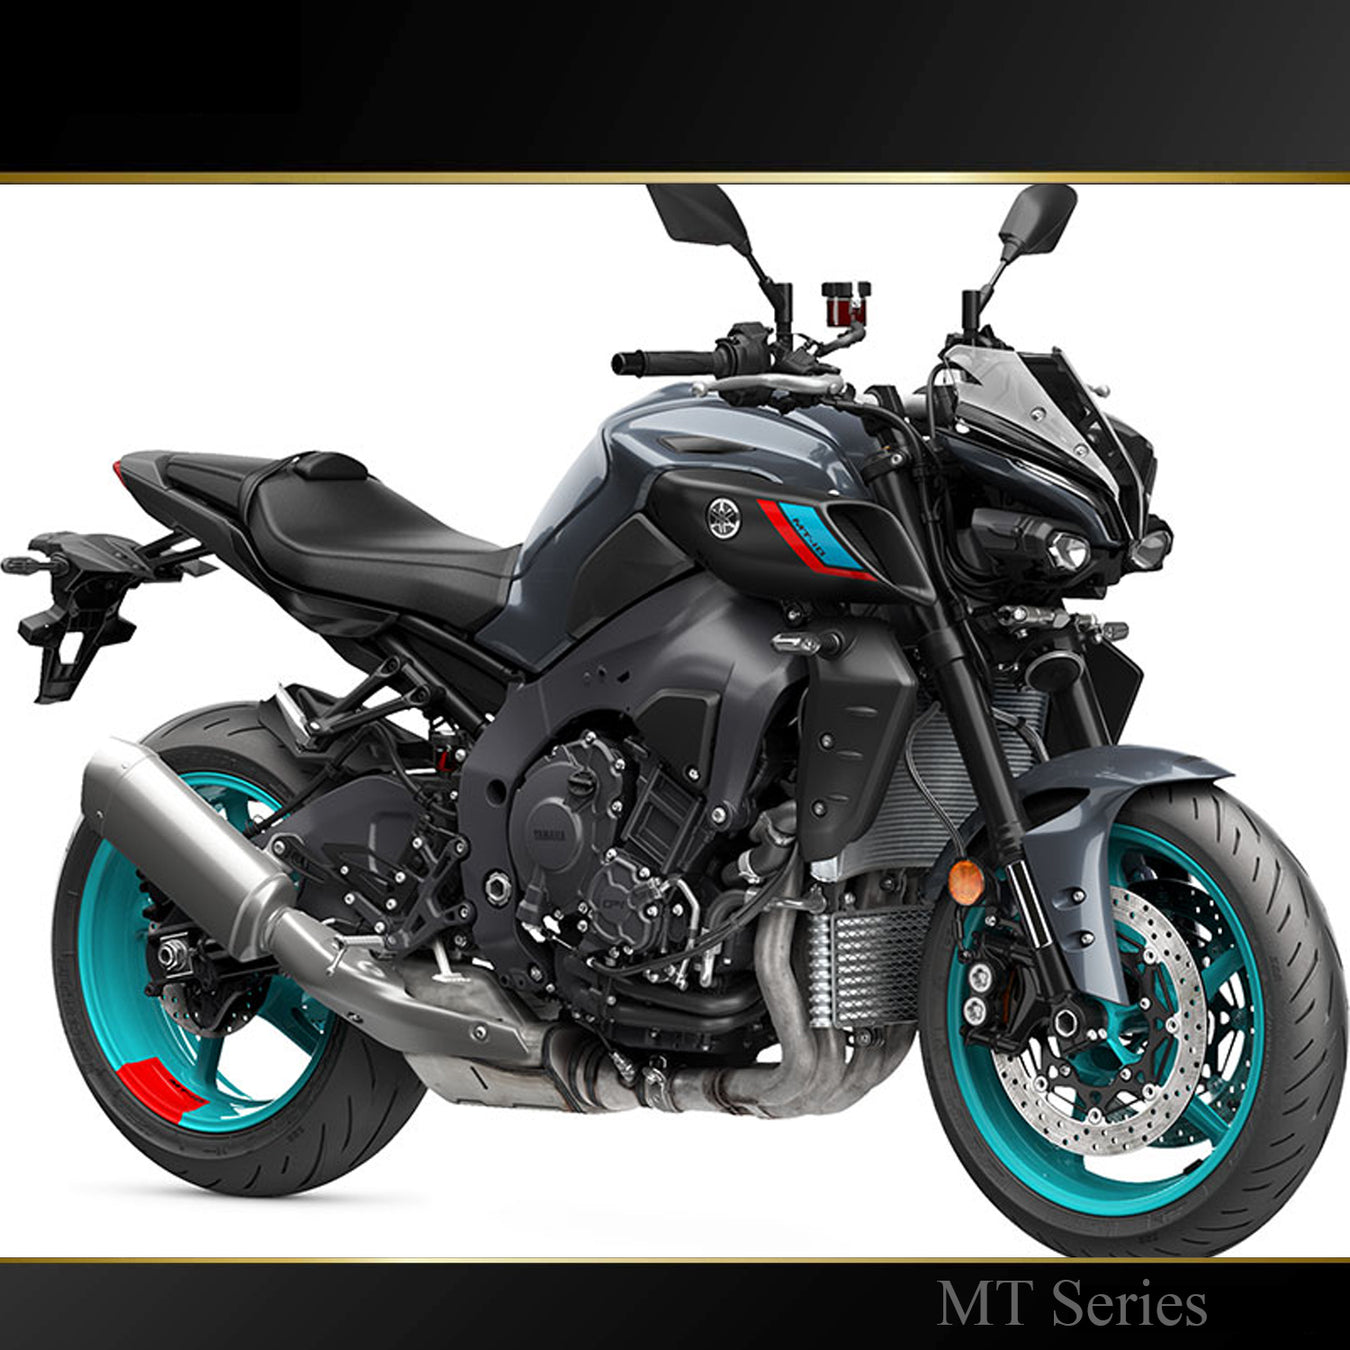 Yamaha MT Parts and Accessories